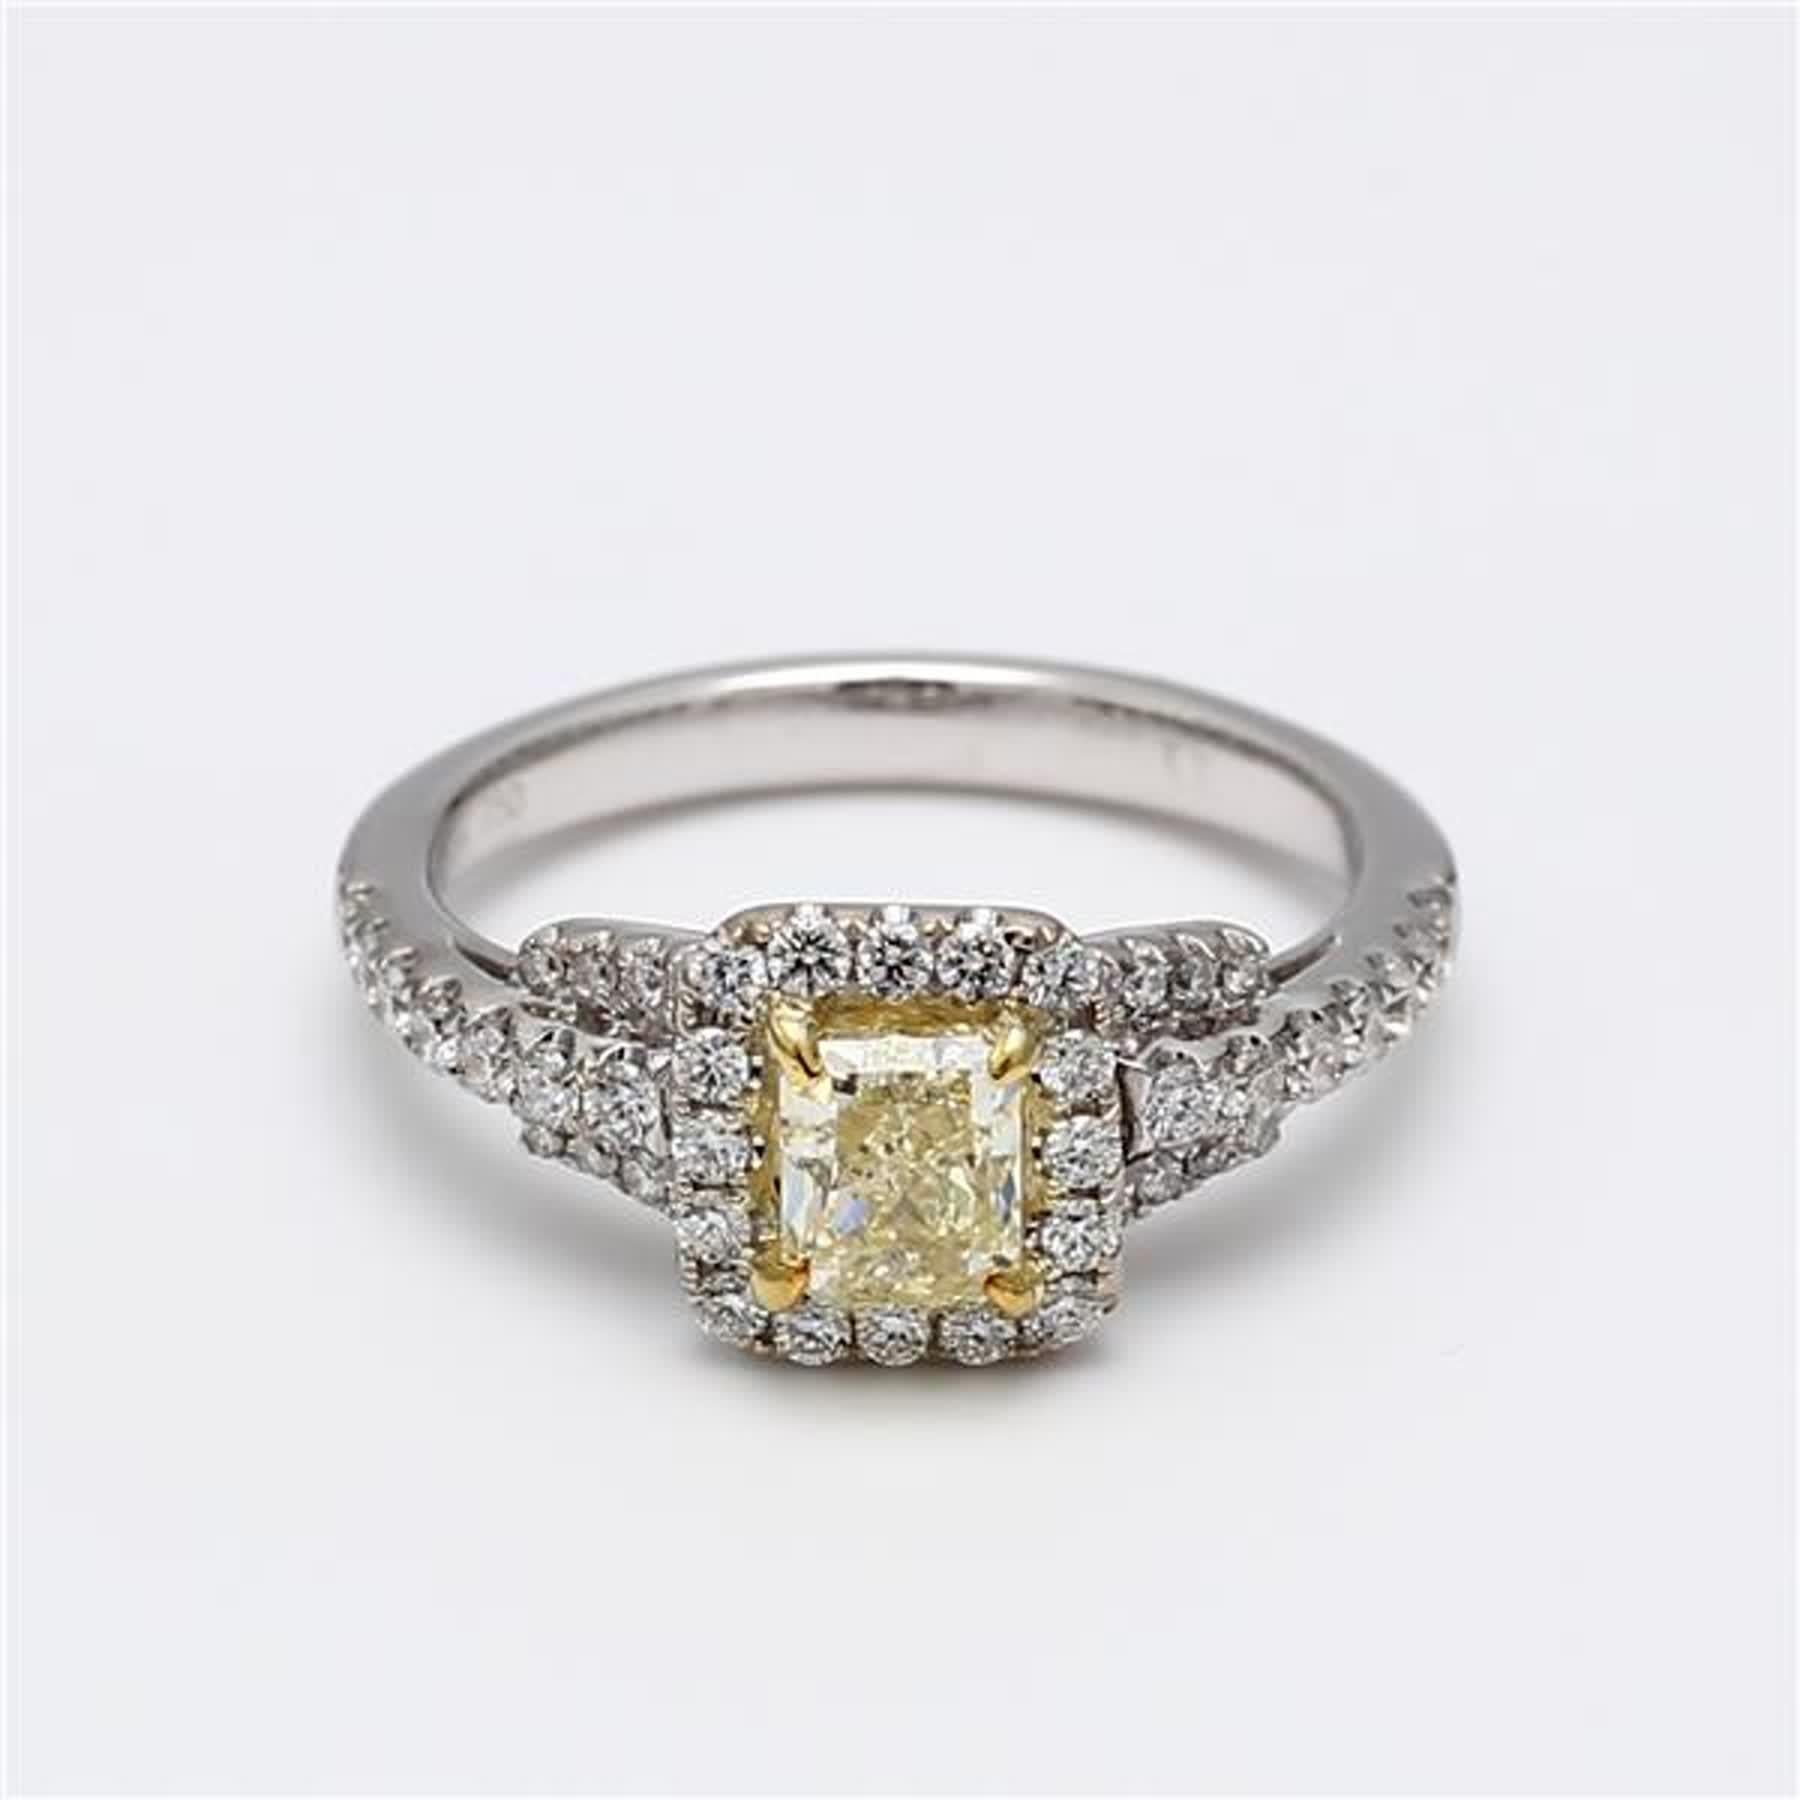 RareGemWorld's classic GIA certified diamond ring. Mounted in a beautiful 18K Yellow and White Gold setting with a natural radiant cut yellow diamond. The yellow diamond is surrounded by round natural white diamond melee. This ring is guaranteed to